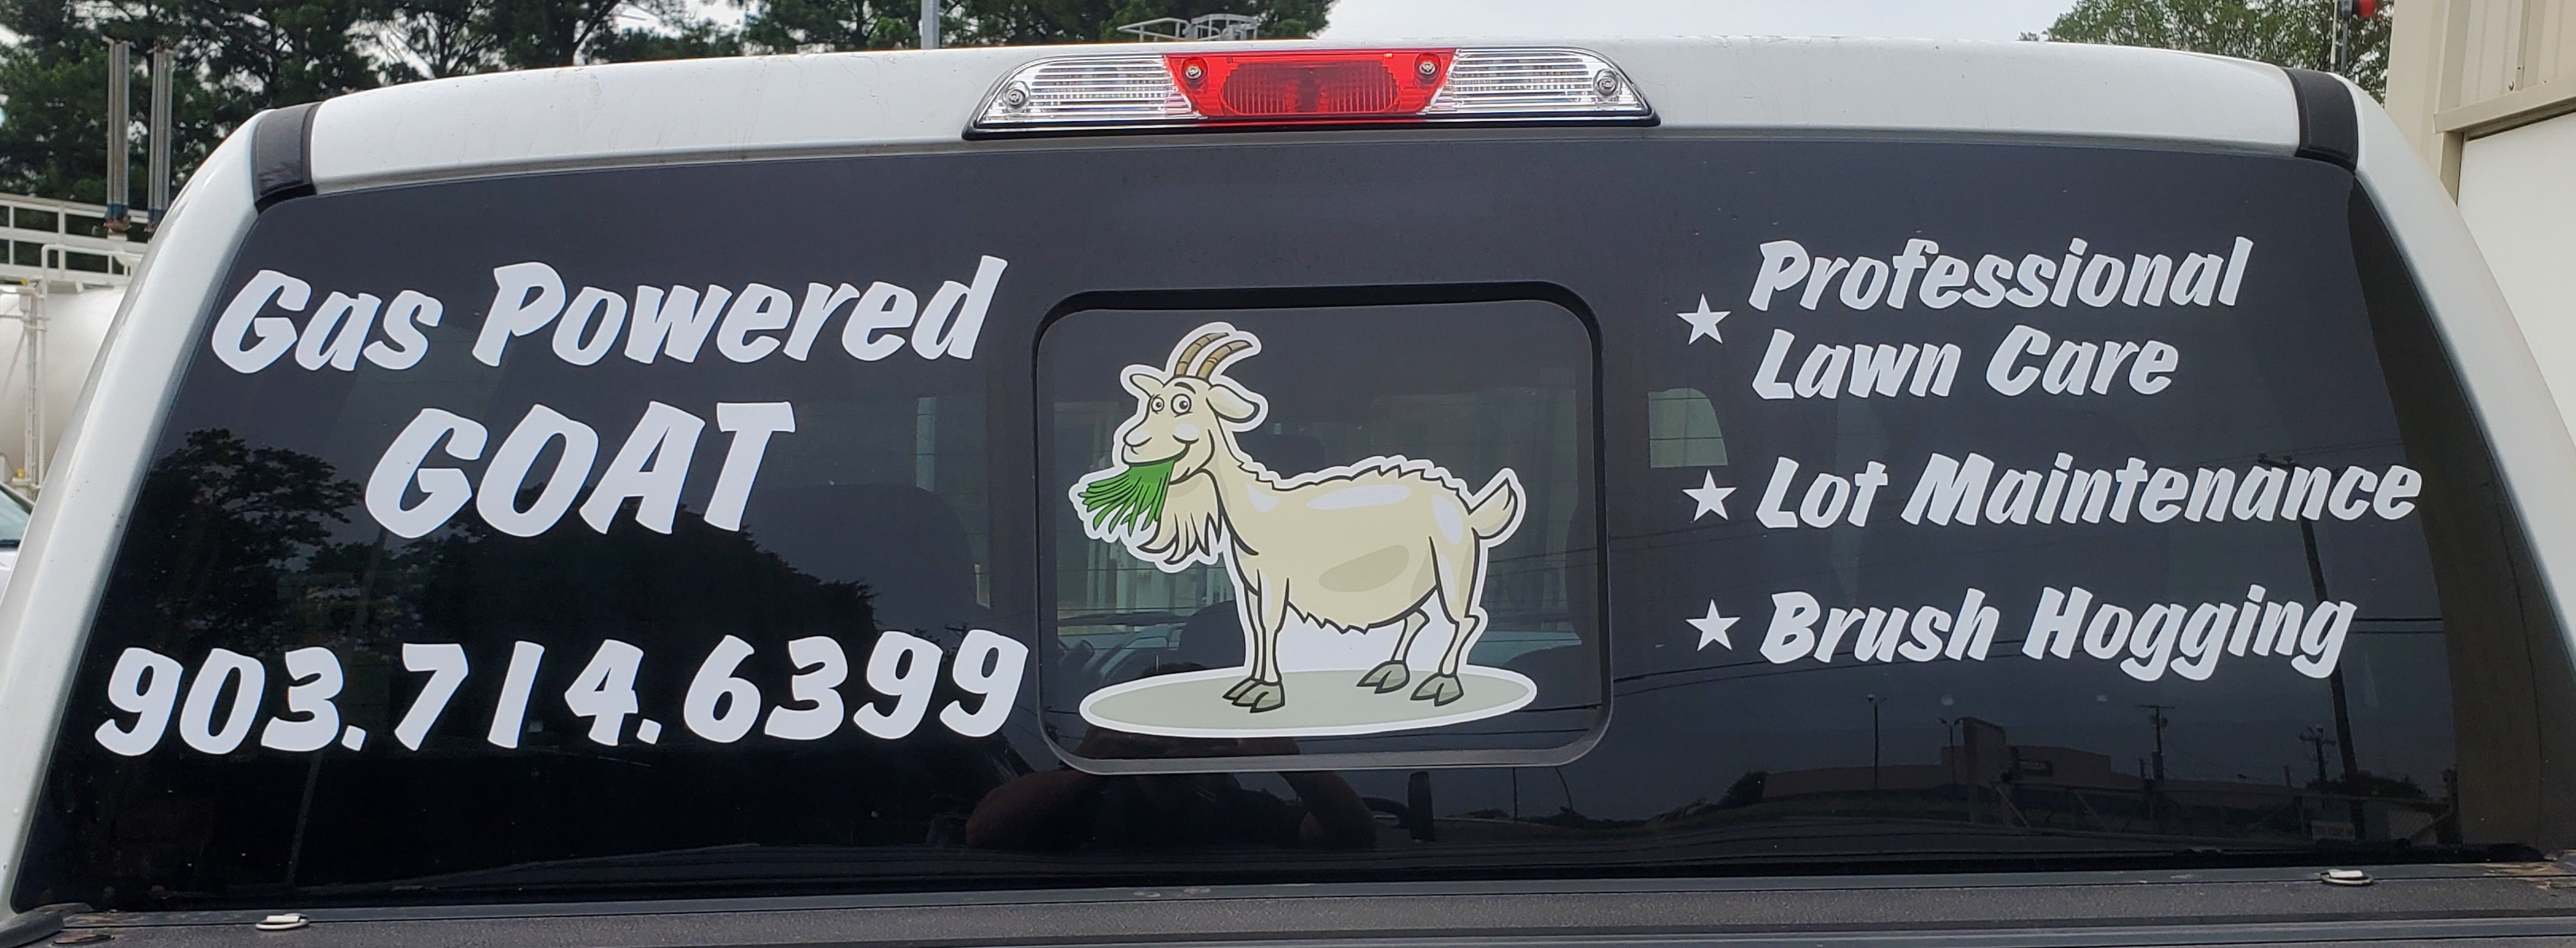 The Gas Powered Goat Logo